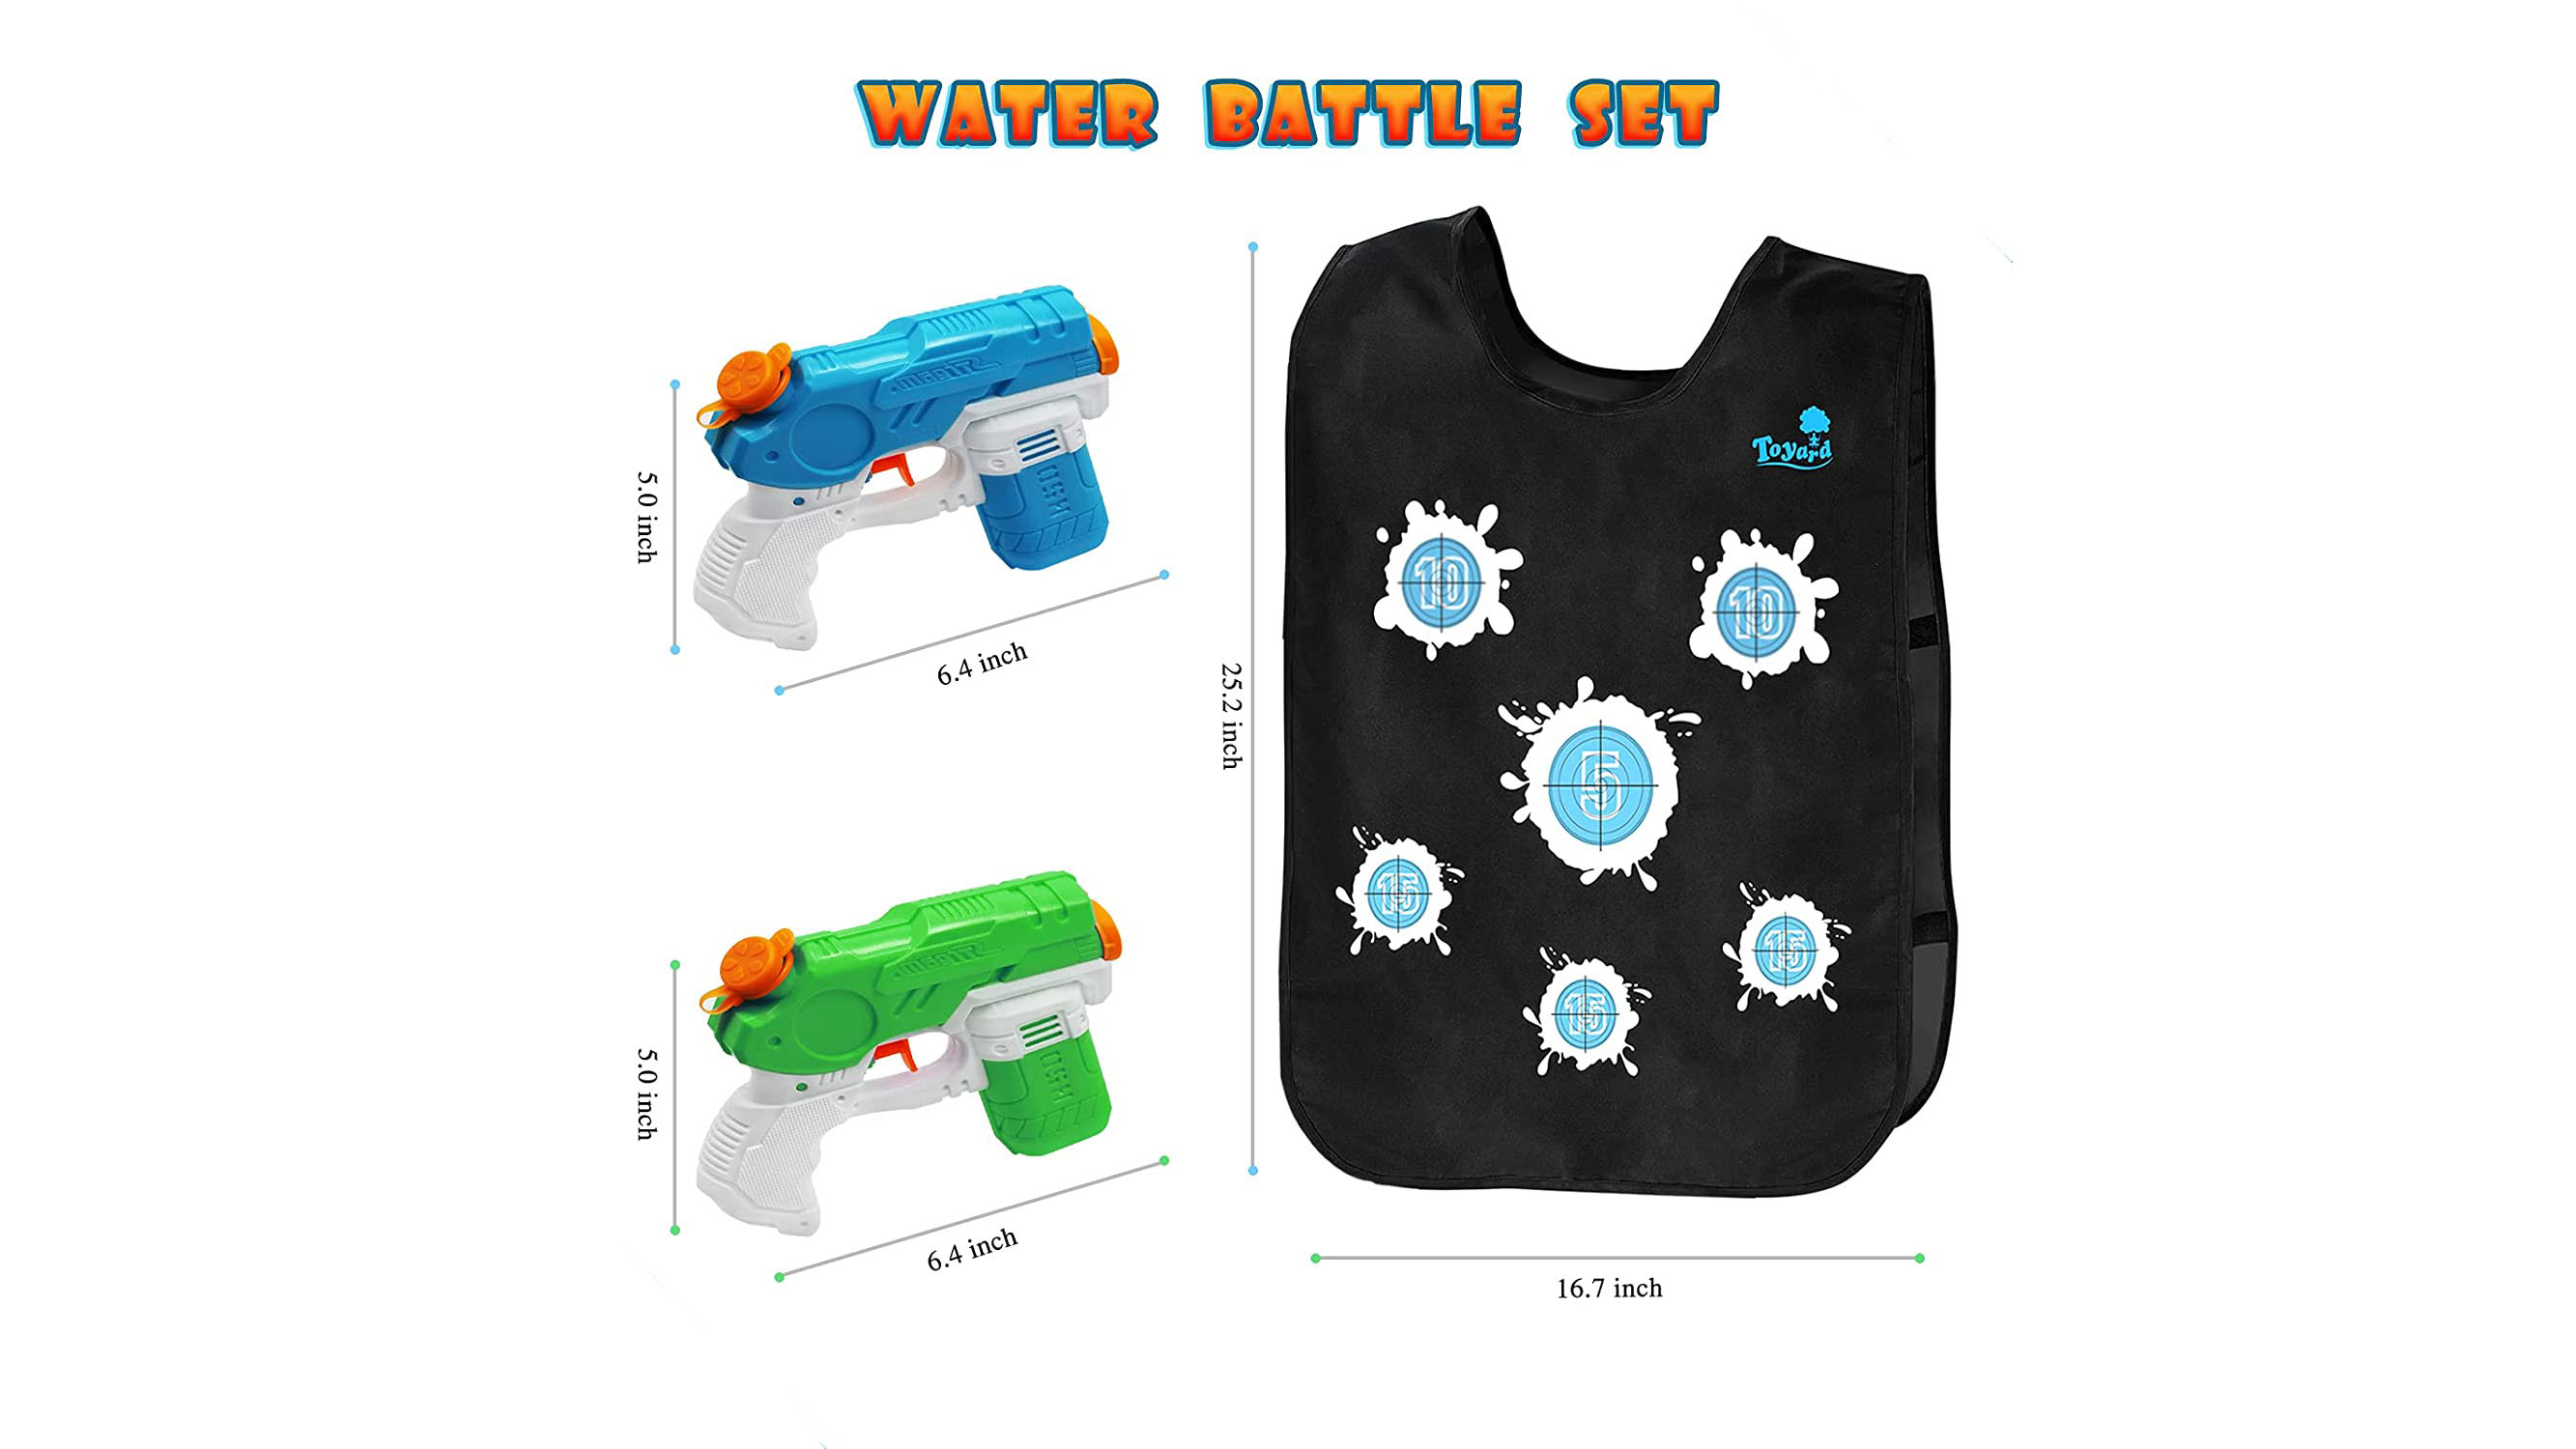 water toys guns and kid vest cheap pool toys as Christmas gift for kids